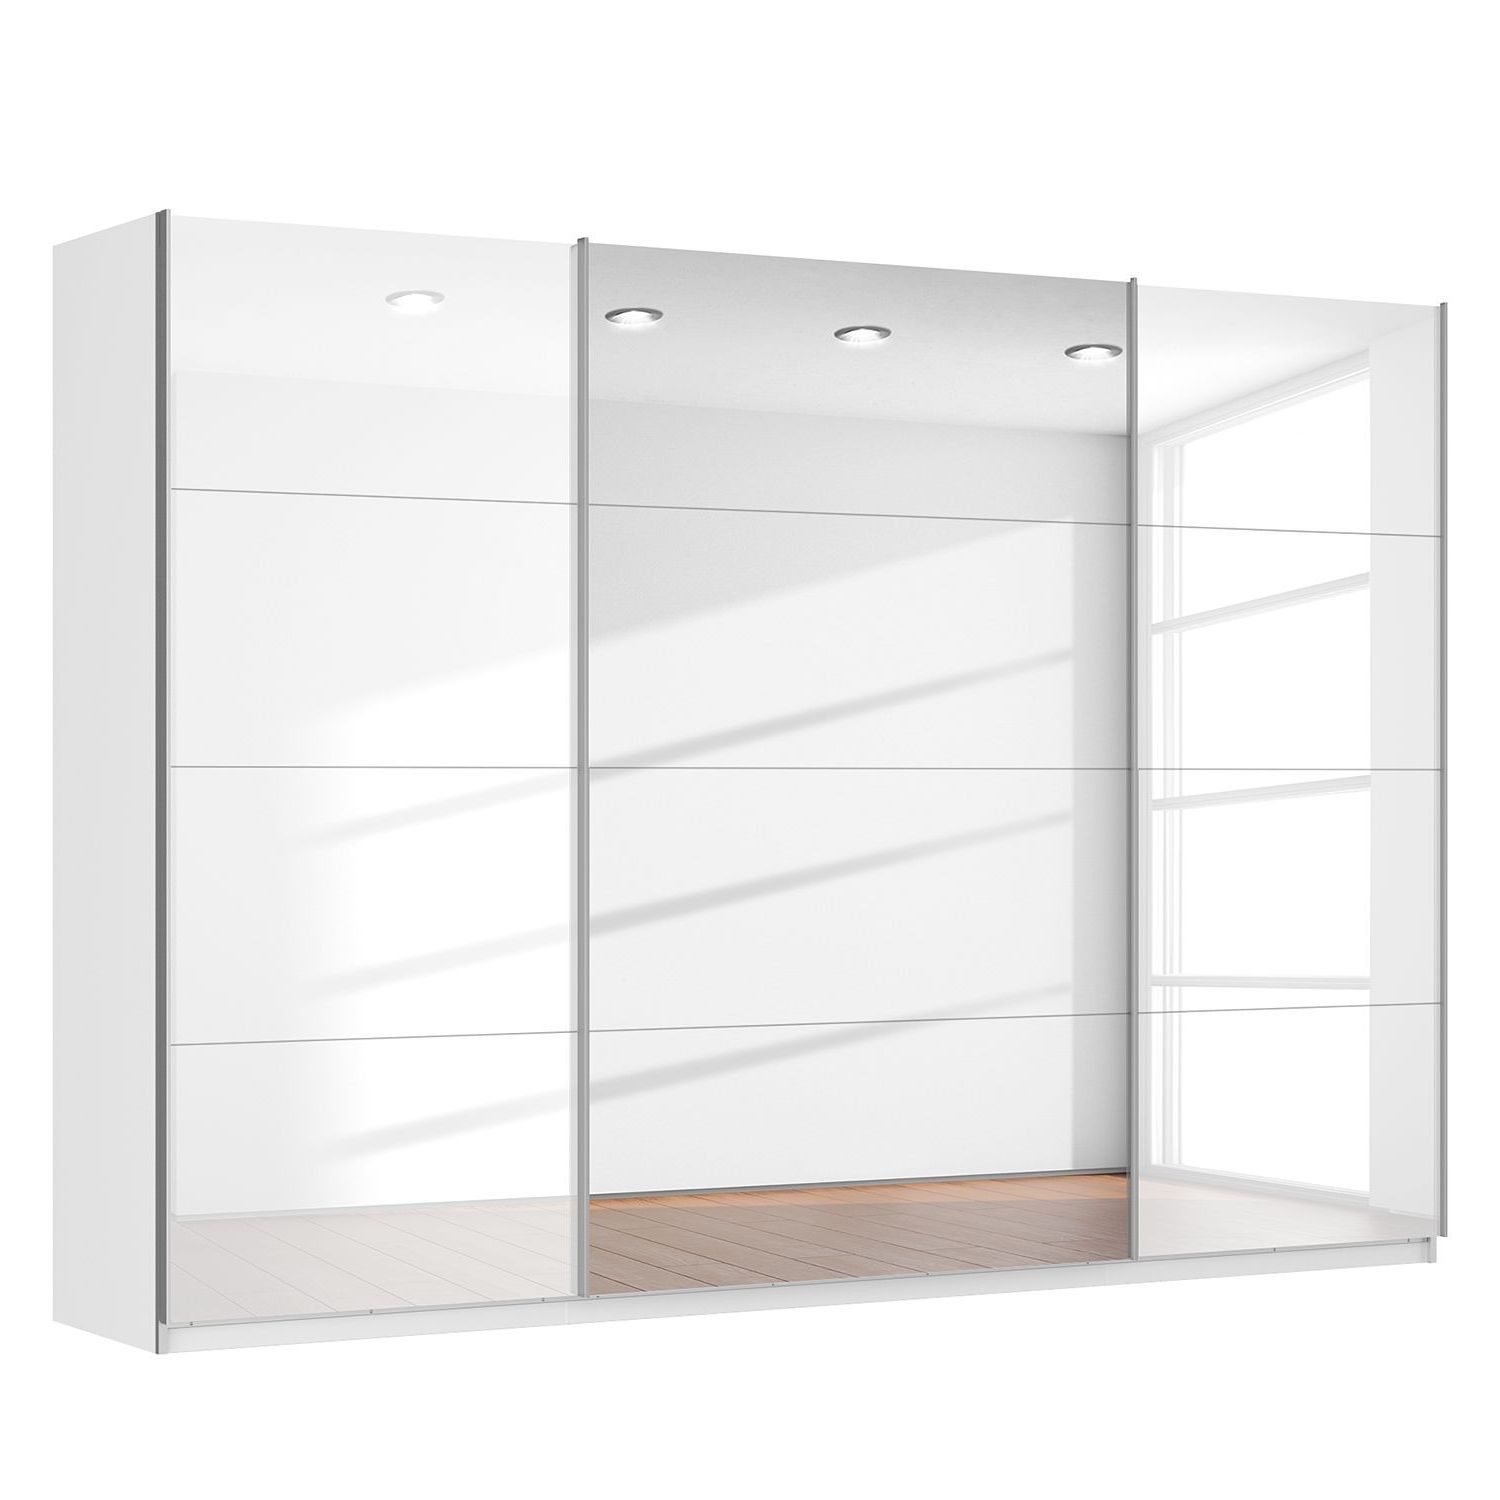 Favorite Tall White Gloss Wardrobes Intended For High Gloss Wardrobes With Sliding Doors (View 4 of 15)